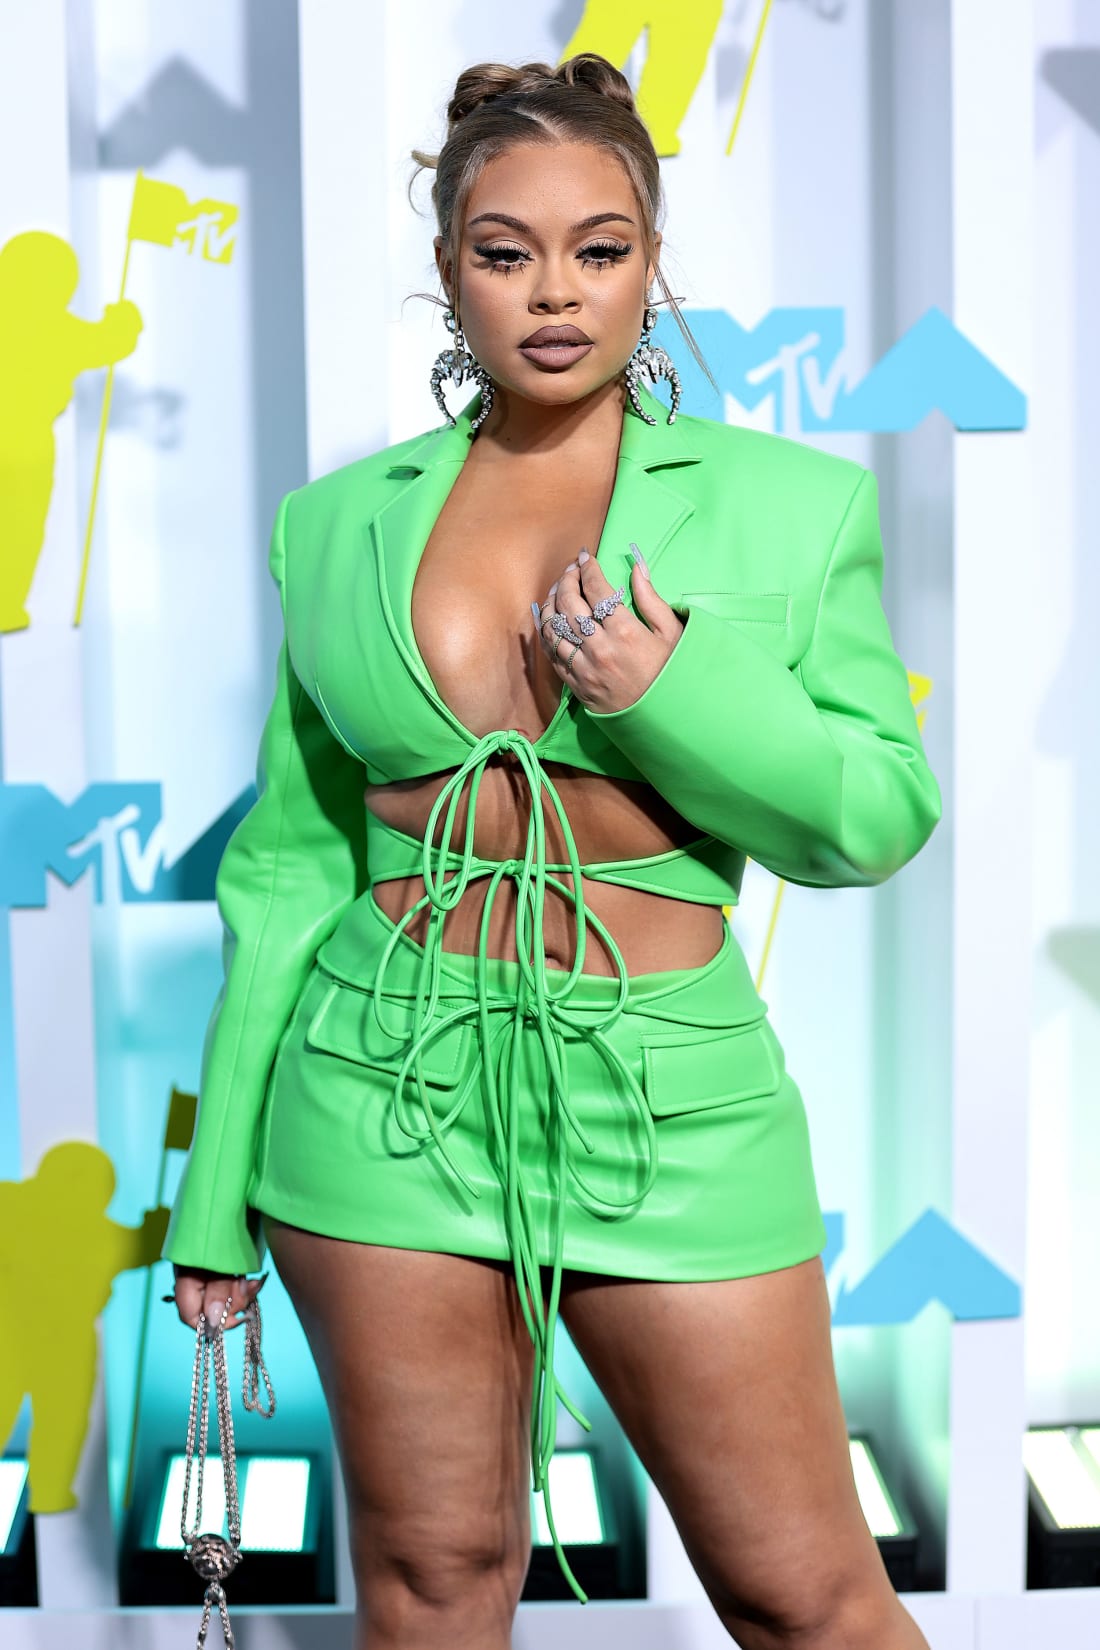 Bright greens popular on the VMAs carpet, with rapper Latto wearing a lace-up mini dress in a neon shade.